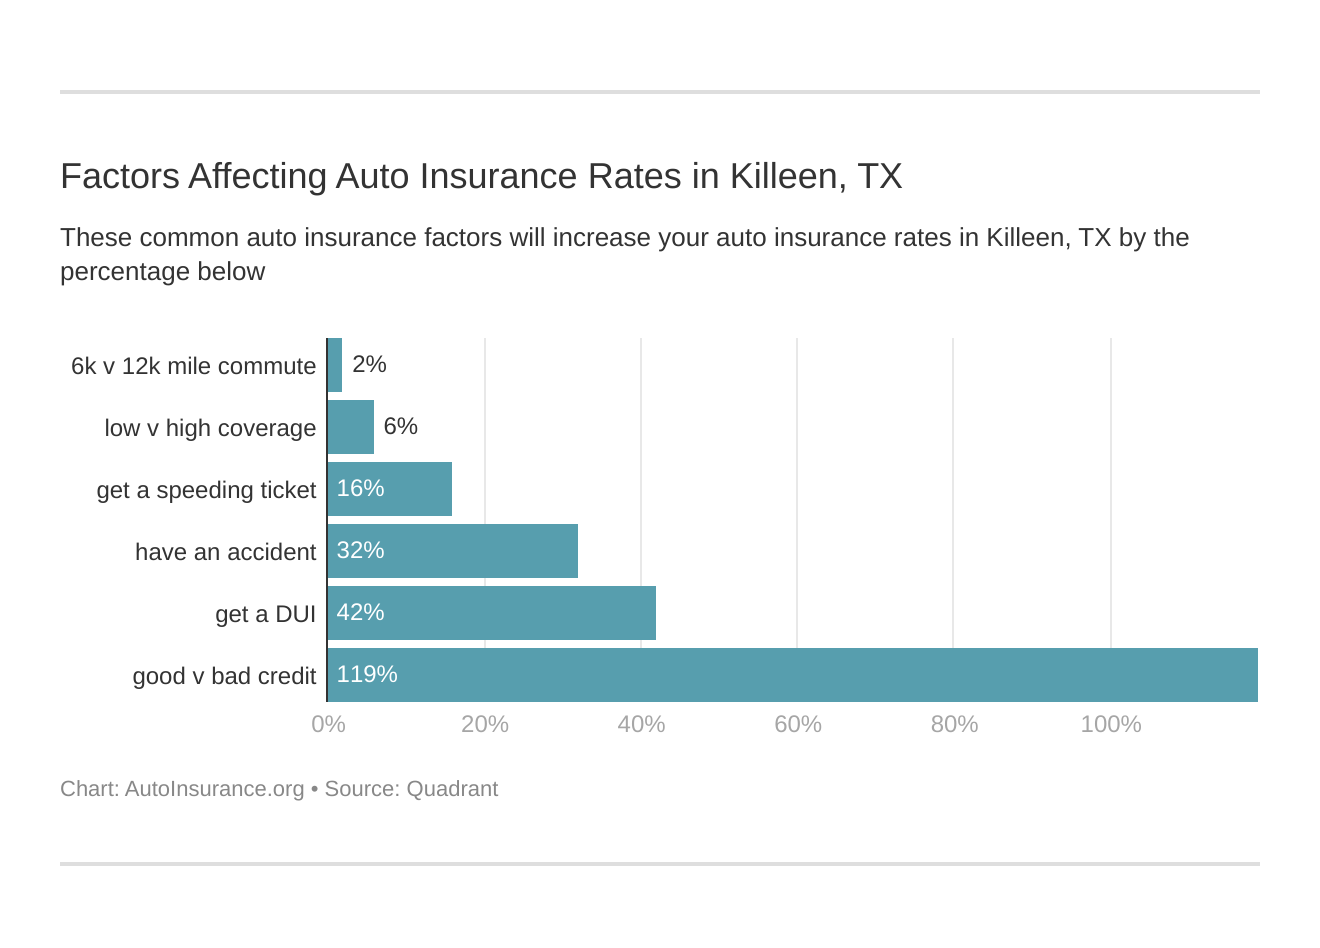 Factors Affecting Auto Insurance Rates in Killeen, TX